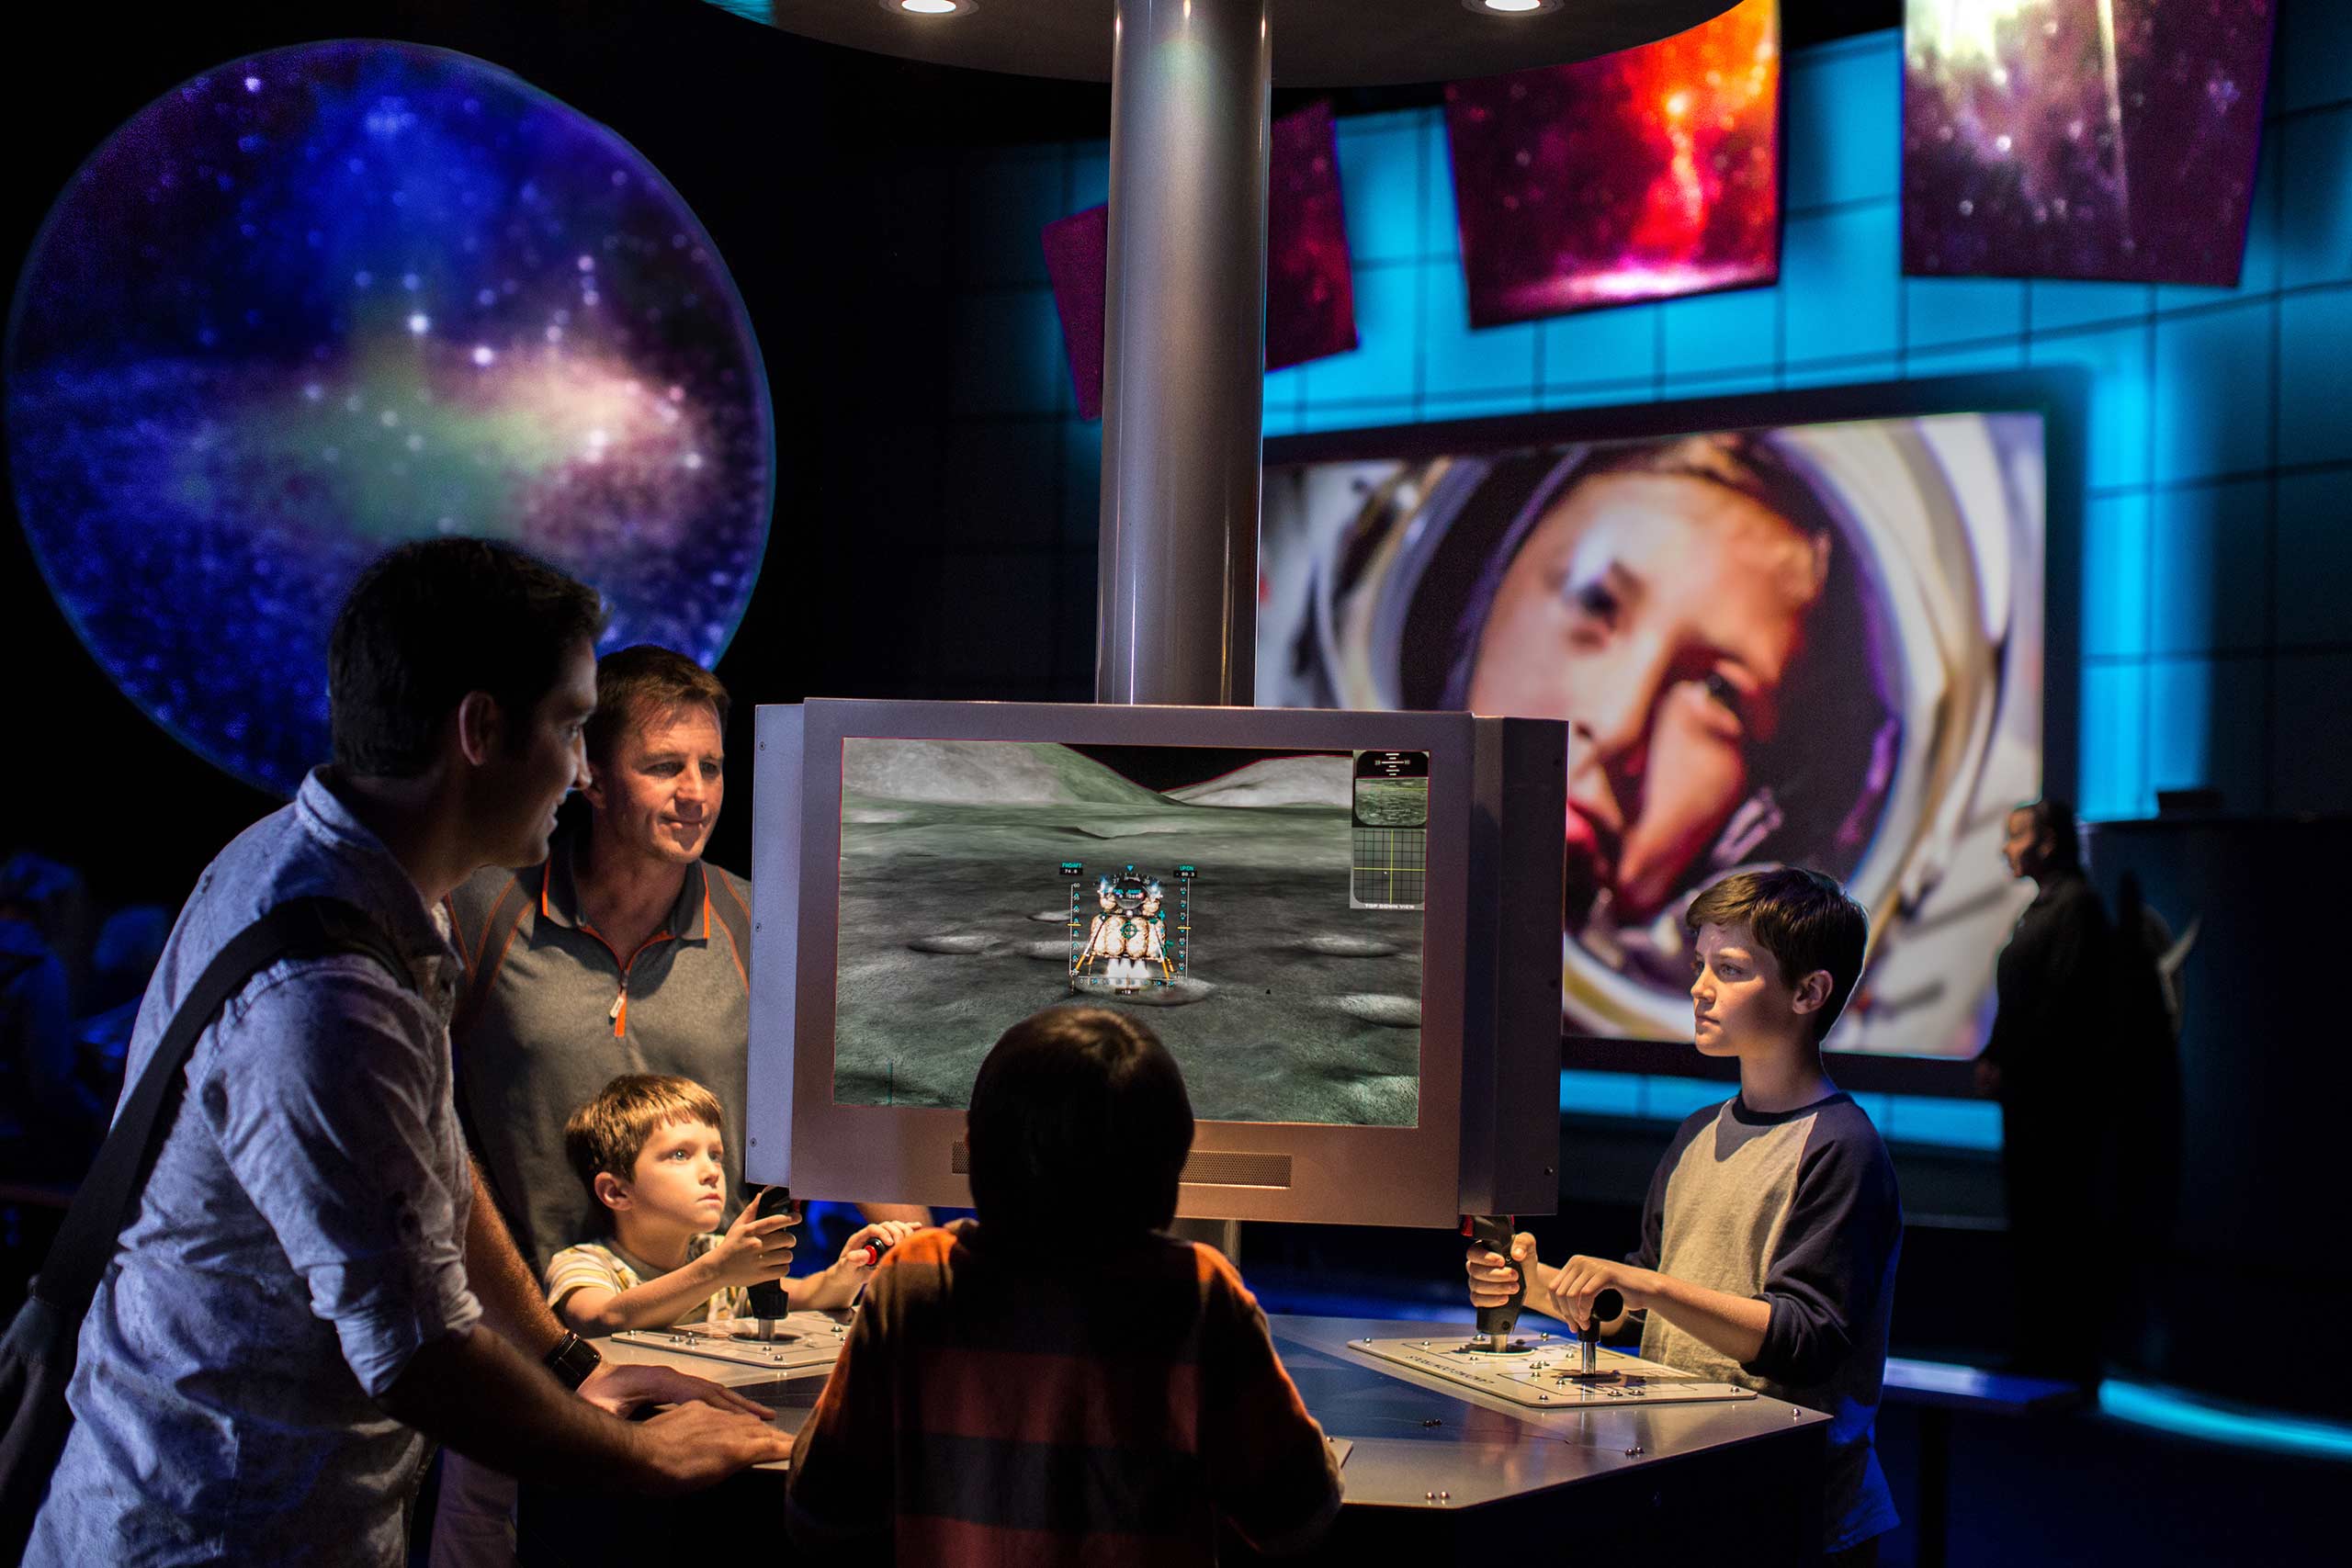 A family surrounding an interactive virtual game at the Kennedy Space Center.